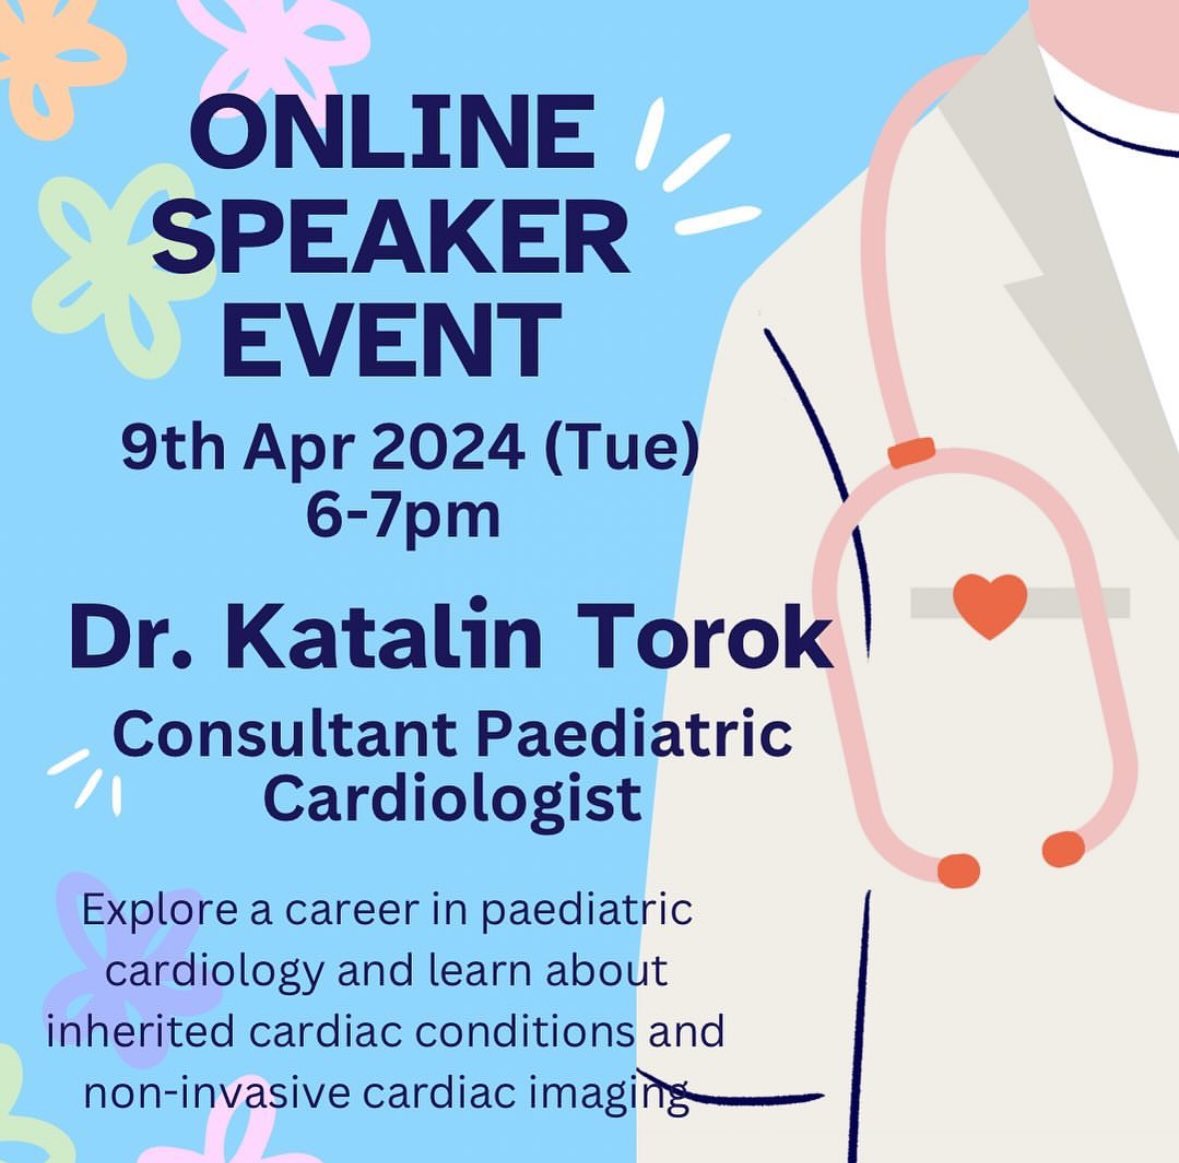 @EUCVS1 are delighted to welcome Dr Torok to discuss a career in paediatric cardiology

Register at:
app.medall.org/event-listings…

#Medstudent #MedStudentTwitter
#FutureCardiologist